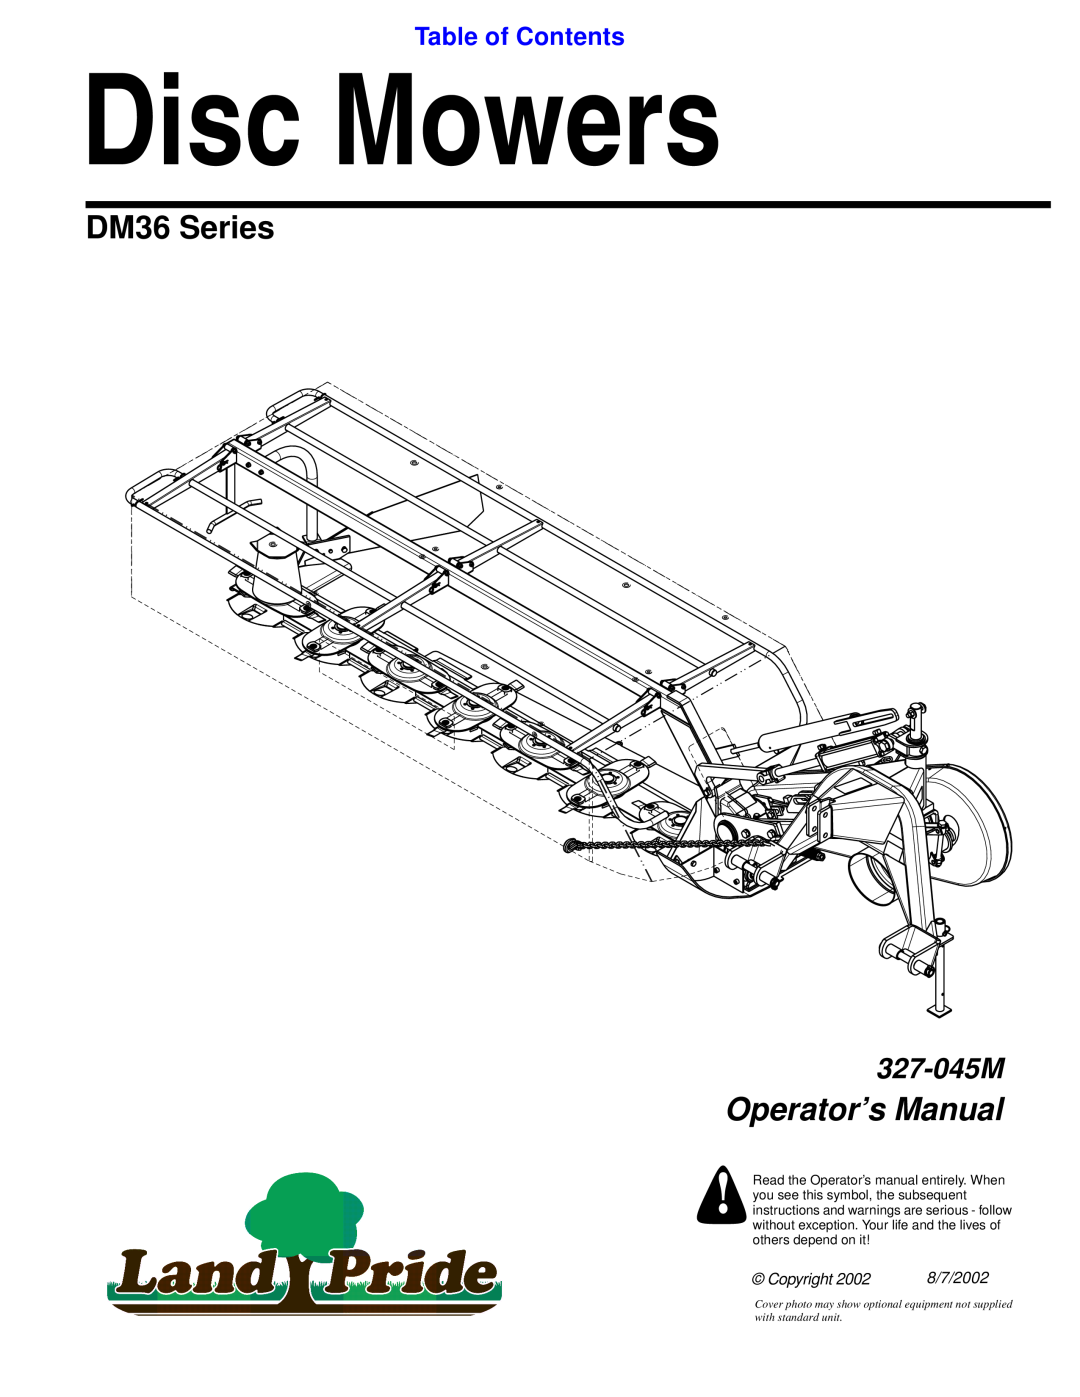 Land Pride DM36 Series manual Table of Contents, Disc Mowers, Operator’s Manual, 327-045M, Copyright, 8/7/2002 